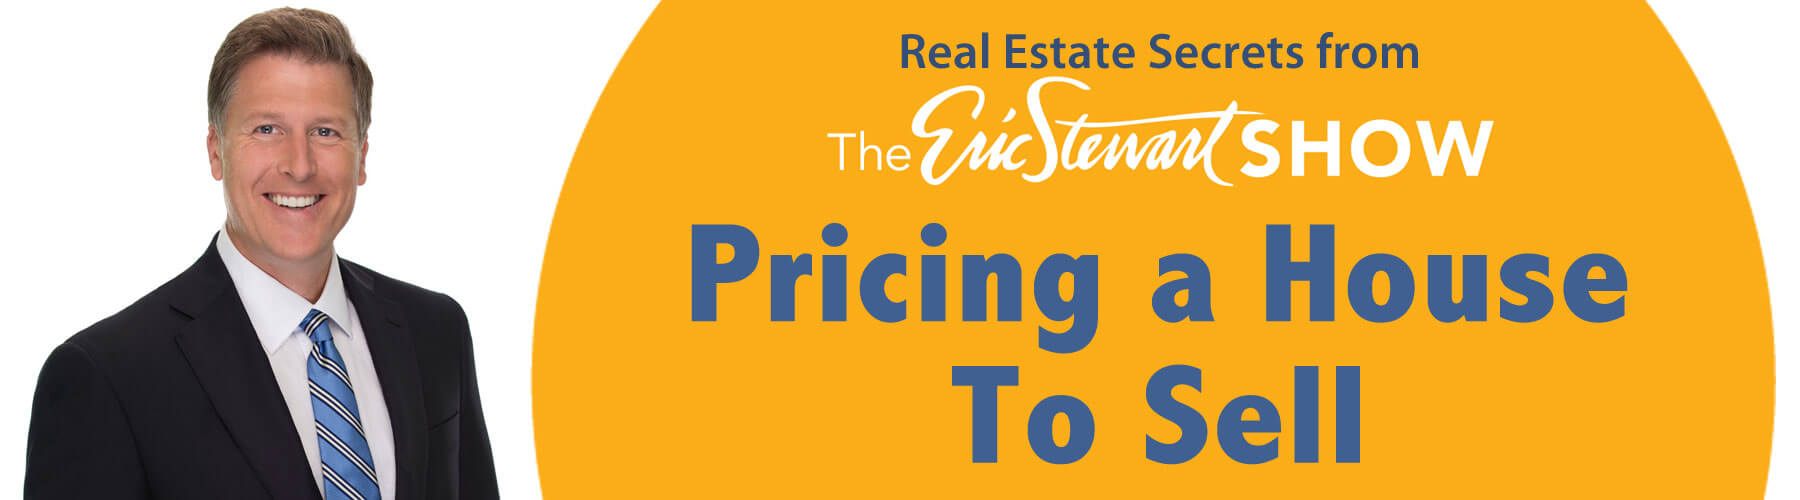 Pricing-a-House-to-Sell-Blog.jpg